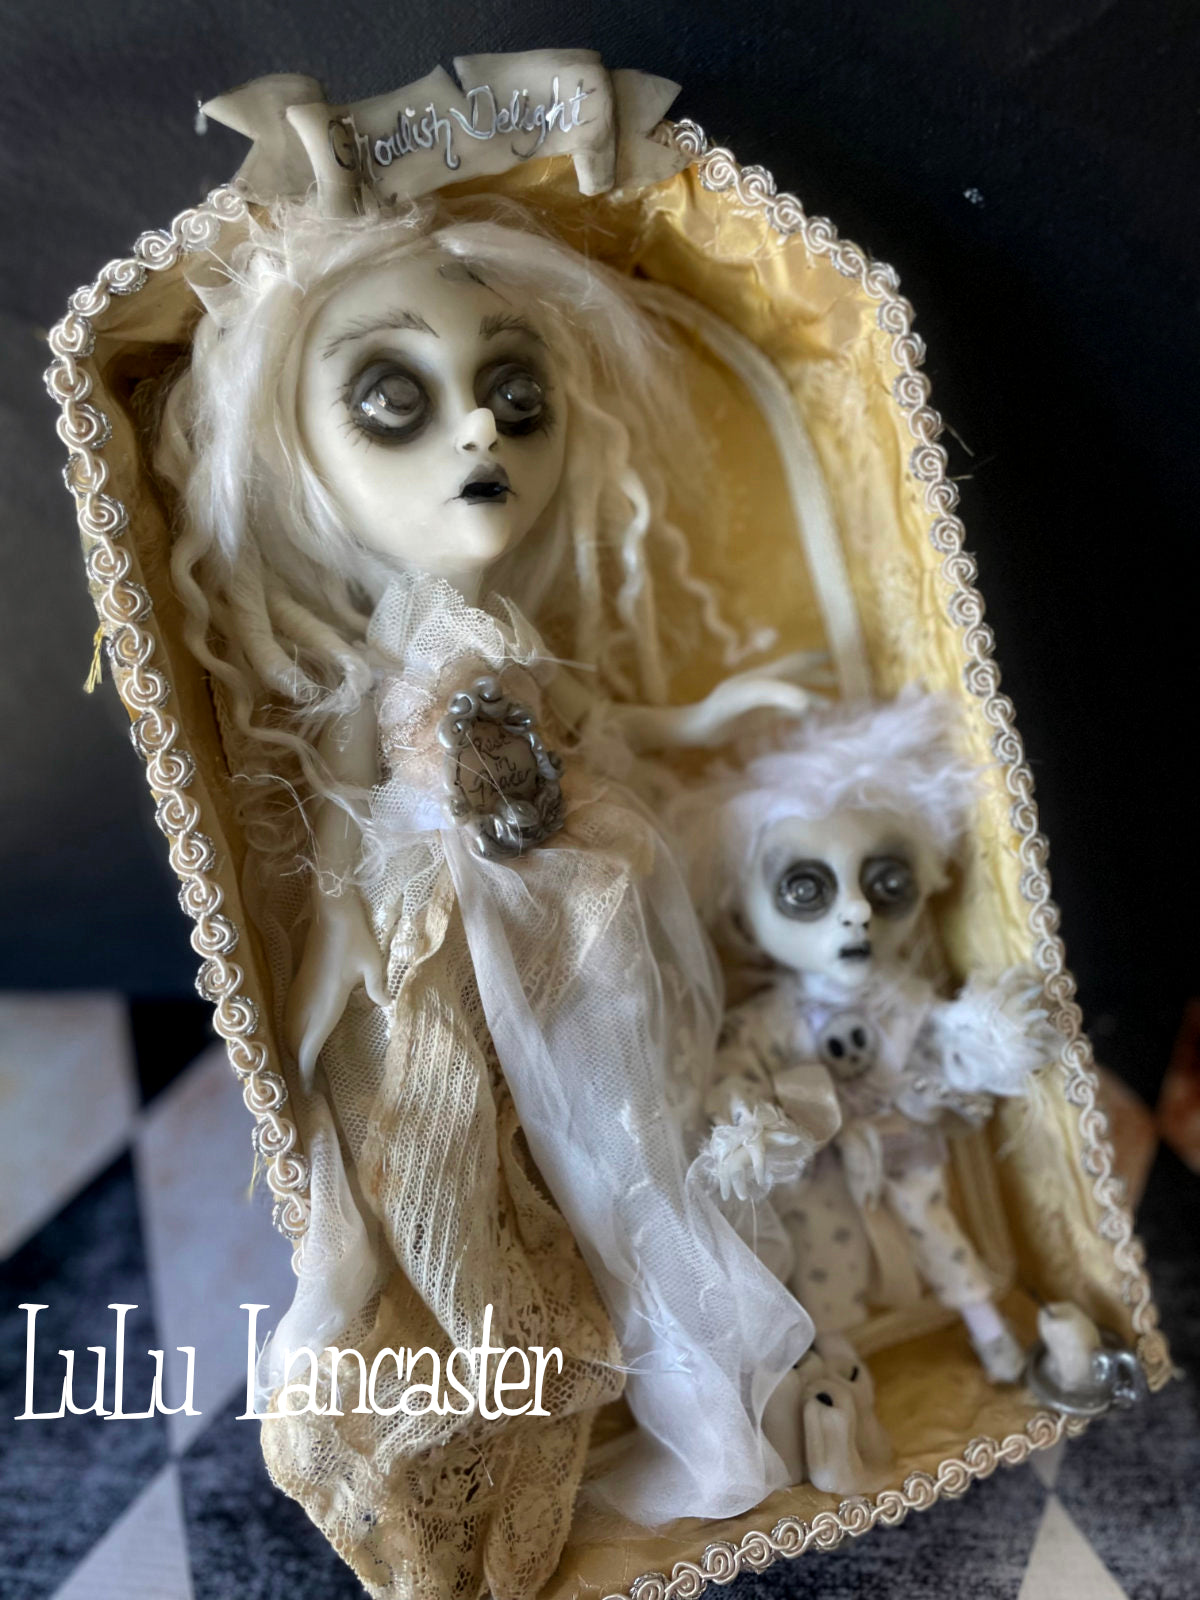 Ghoulish Delight Boxed ghosts Original LuLu Lancaster Art Doll